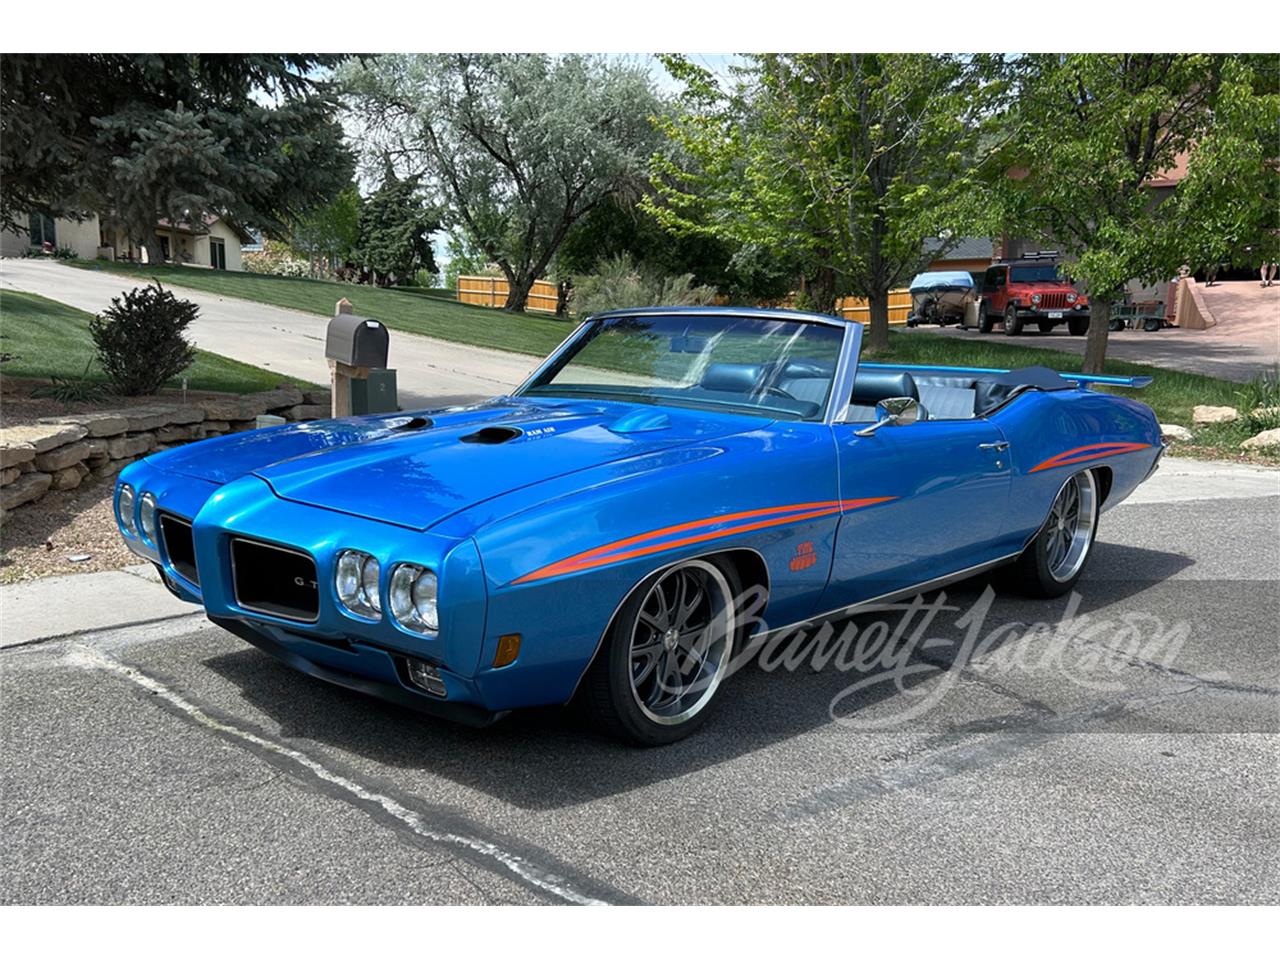 For Sale at Auction: 1970 Pontiac LeMans in Scottsdale, Arizona for sale in Scottsdale, AZ